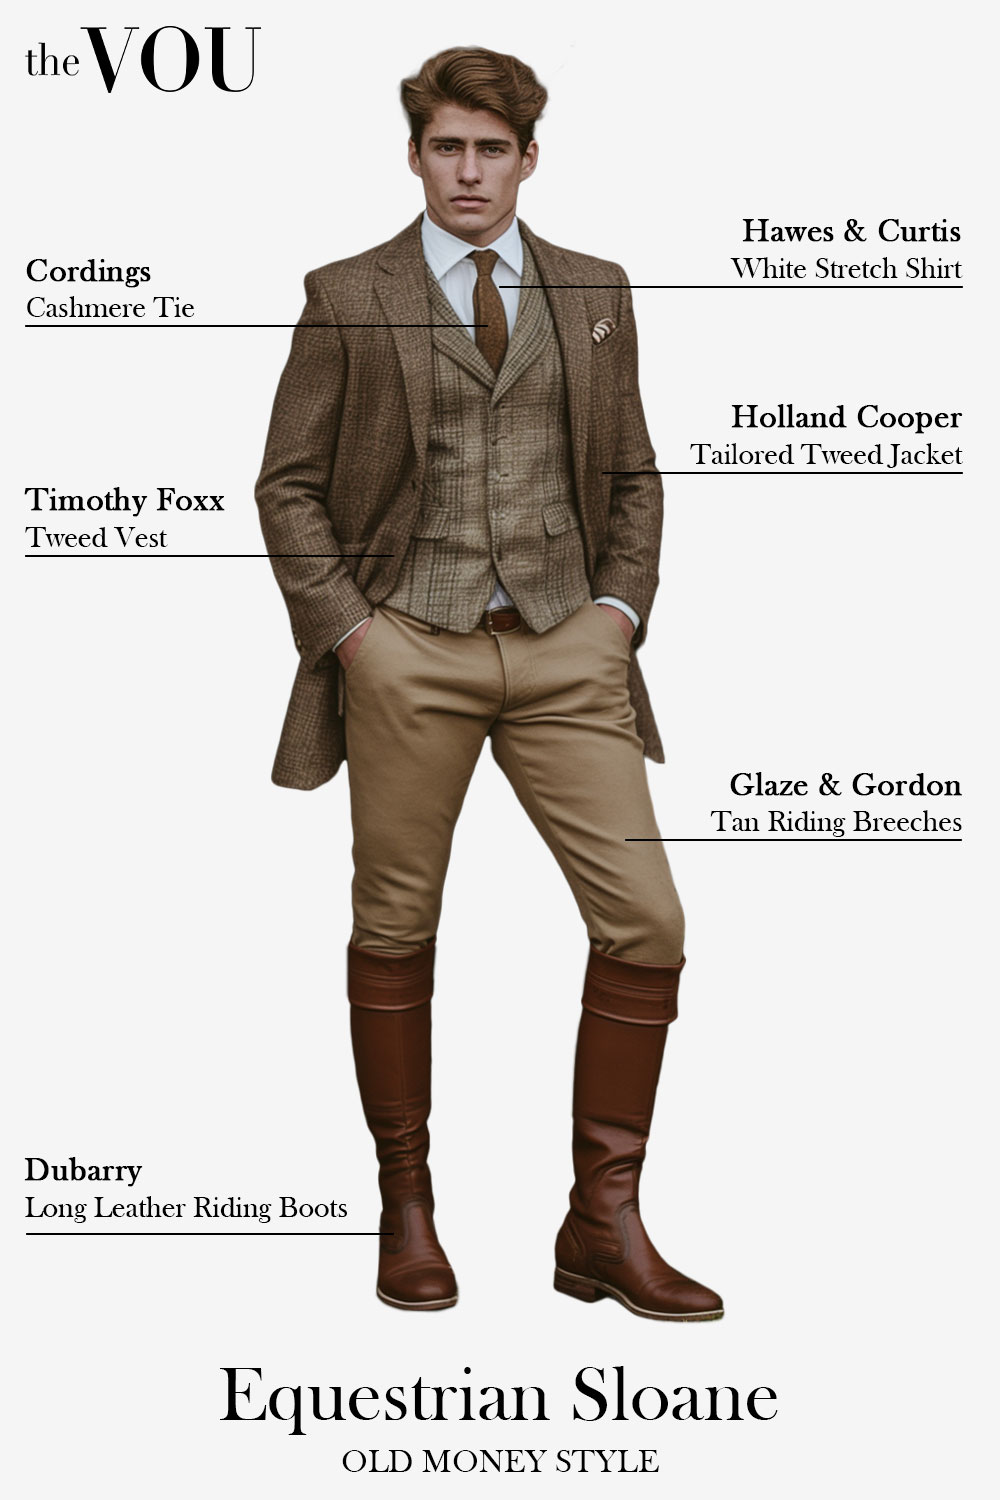 Equestrian Sloane Ranger Old Money Outfit Idea